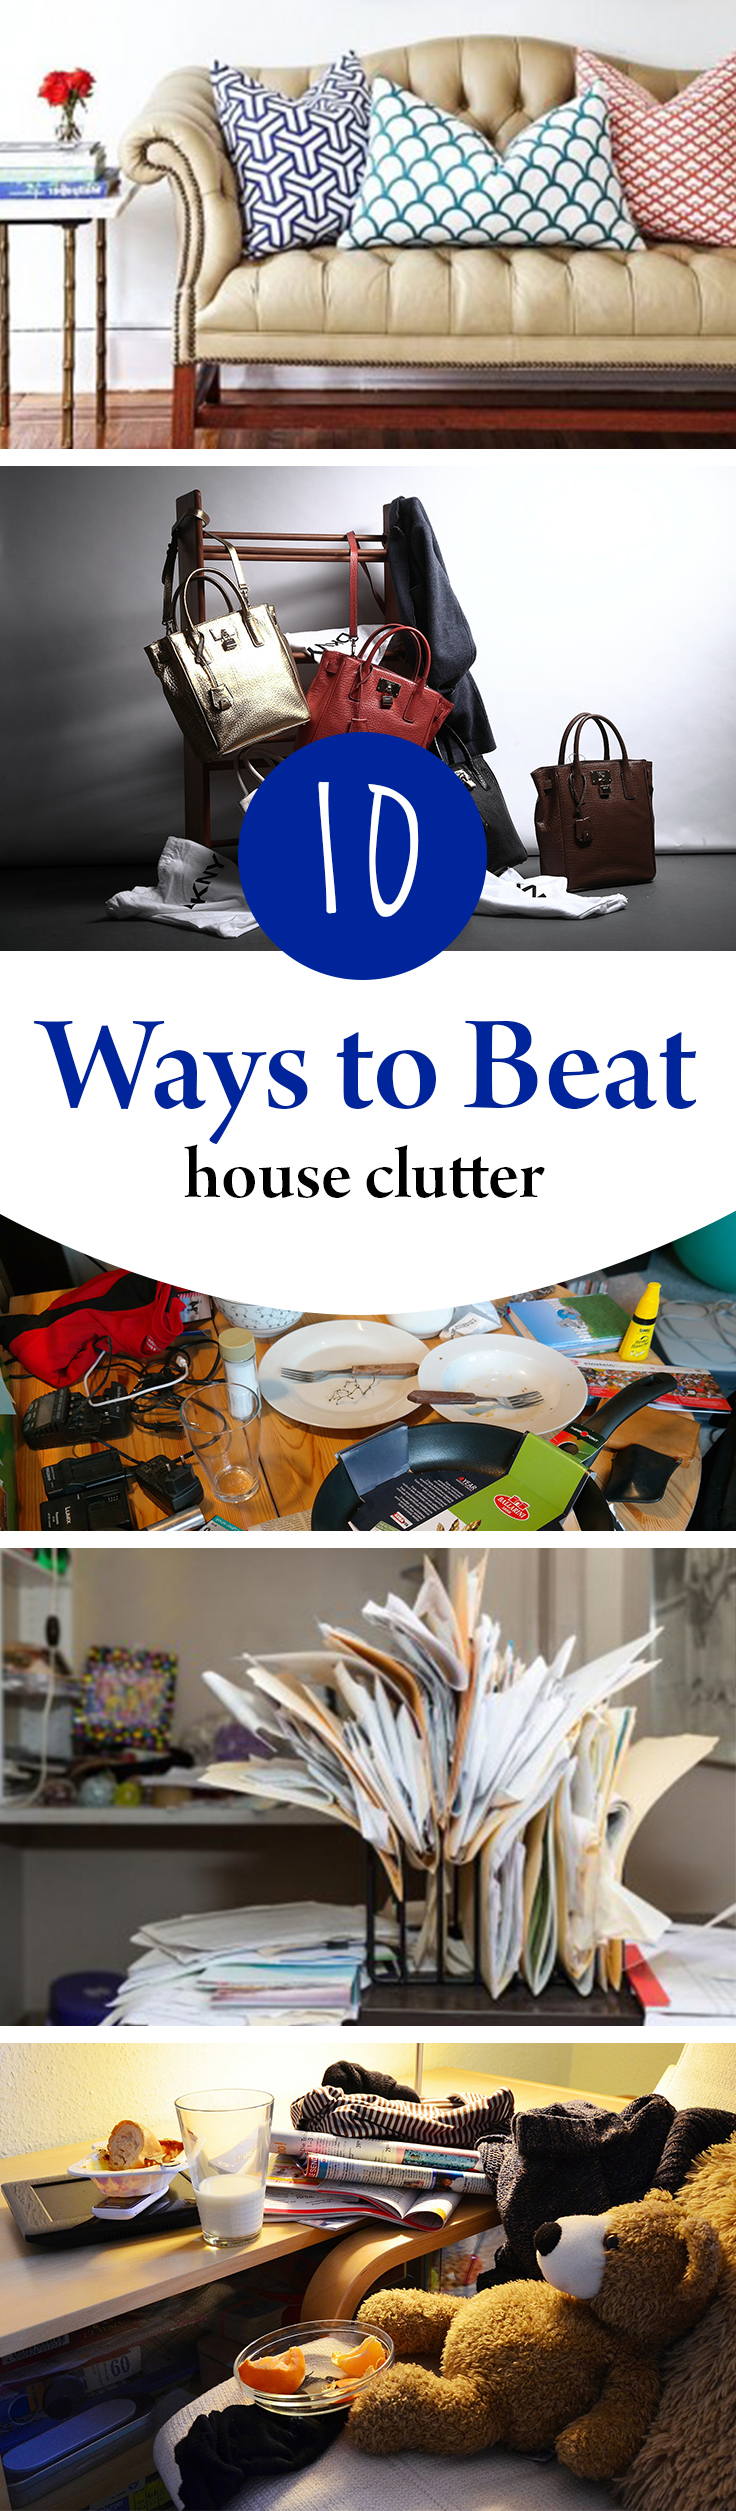 Cutter, house clutter, how to beat house clutter, popular pin, cleaning, cleaning tips, clutter free home, clutter free living.